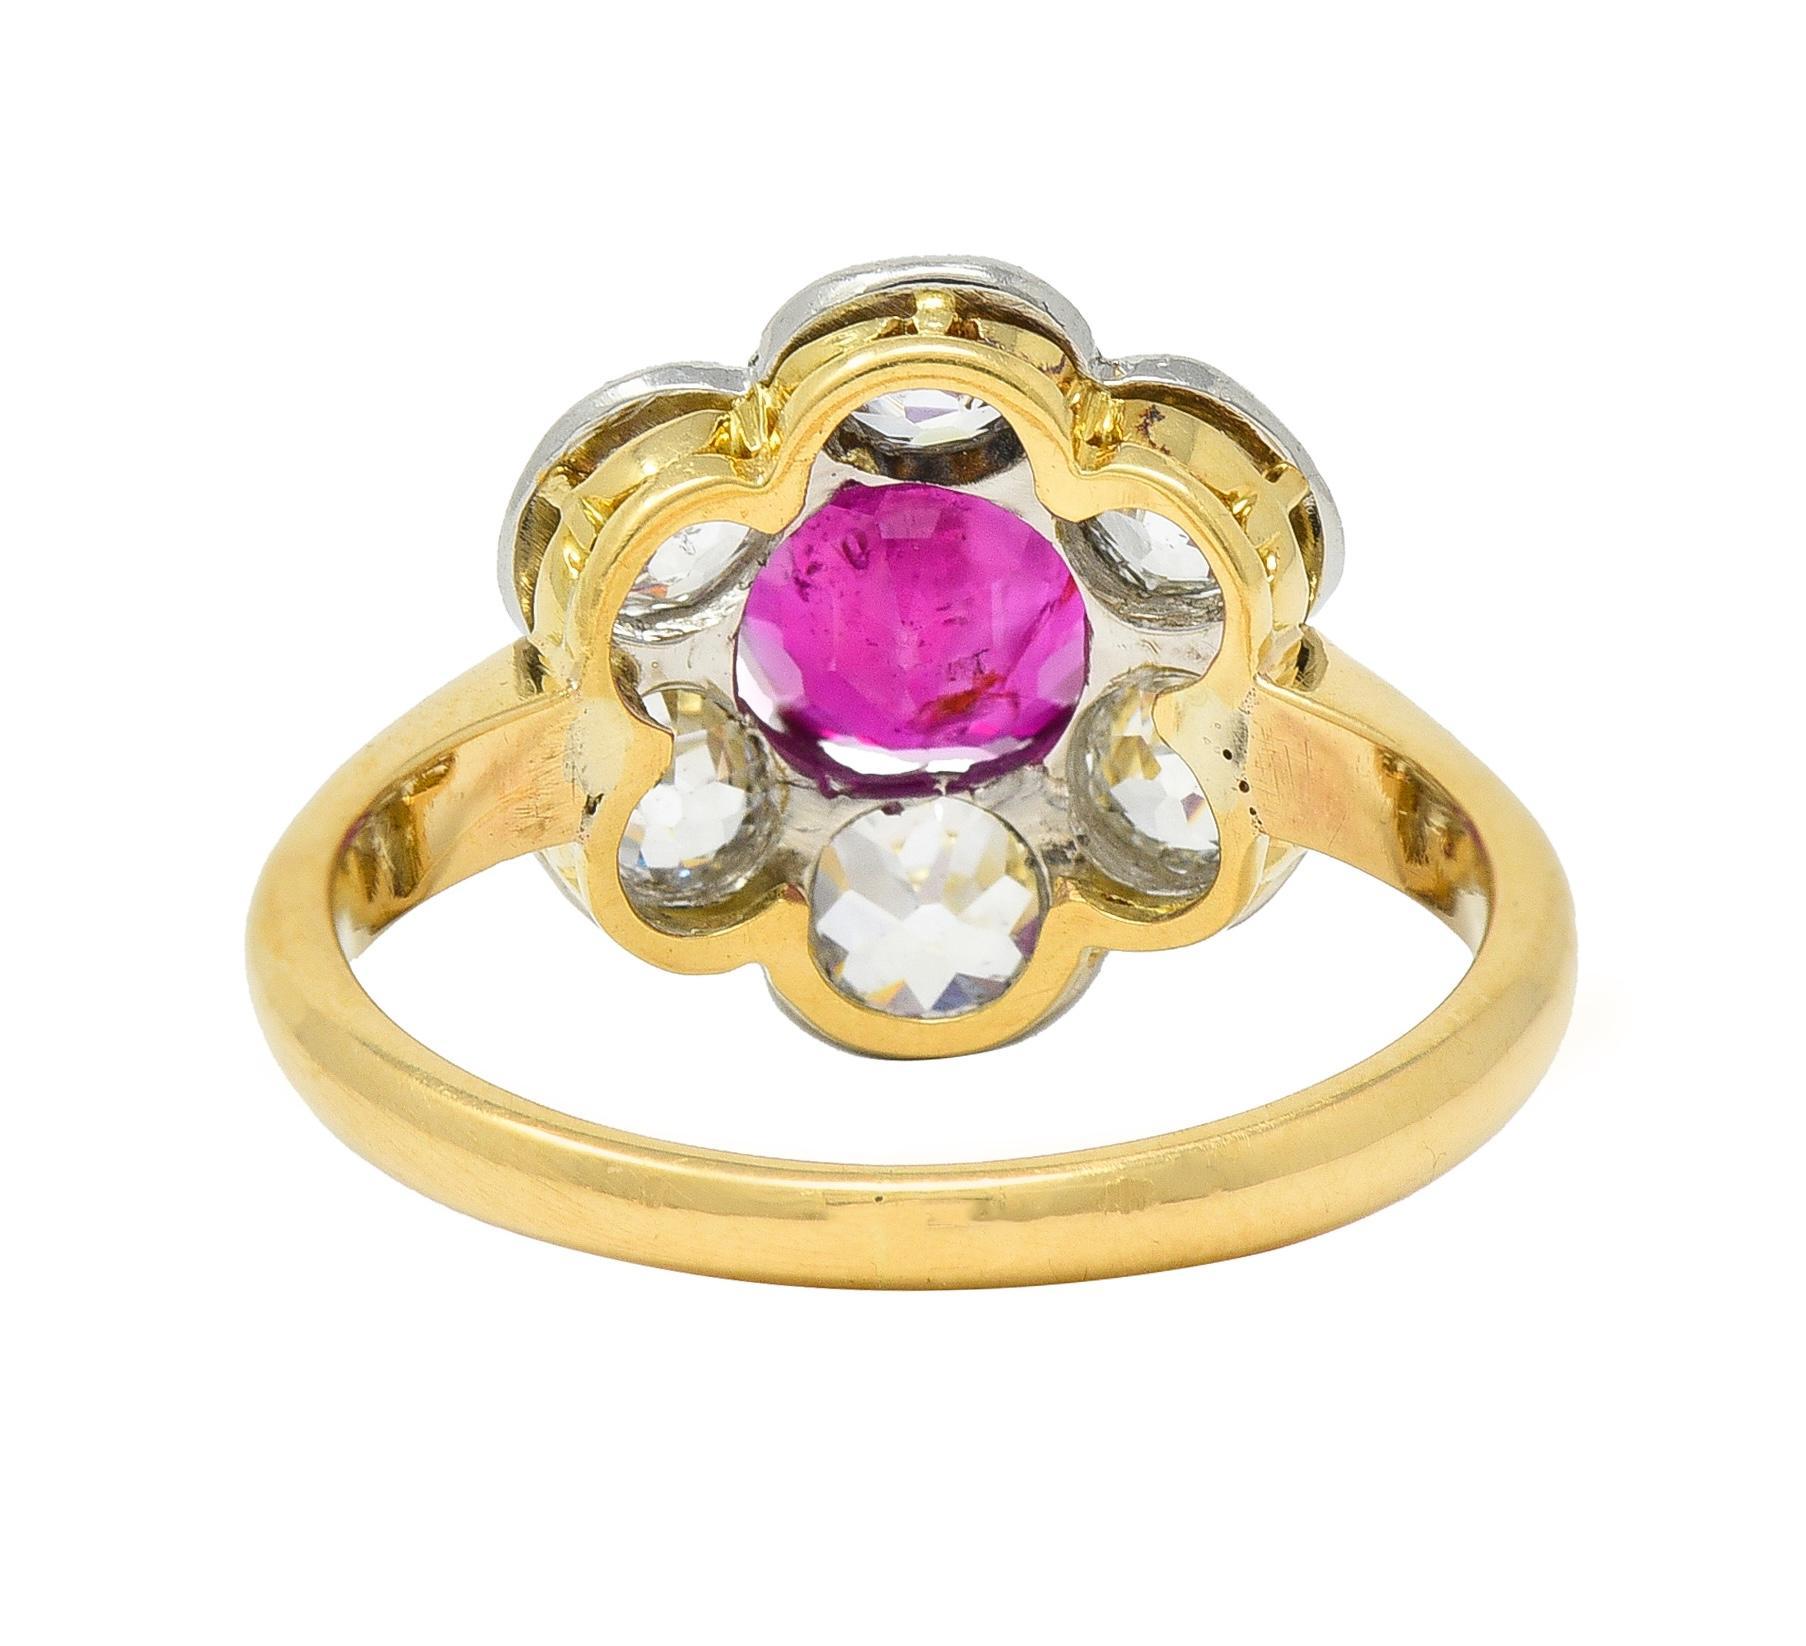 Edwardian 3.39 CTW No Heat Burma Ruby Diamond Platinum 18 Karat Cluster Ring GIA In Excellent Condition For Sale In Philadelphia, PA